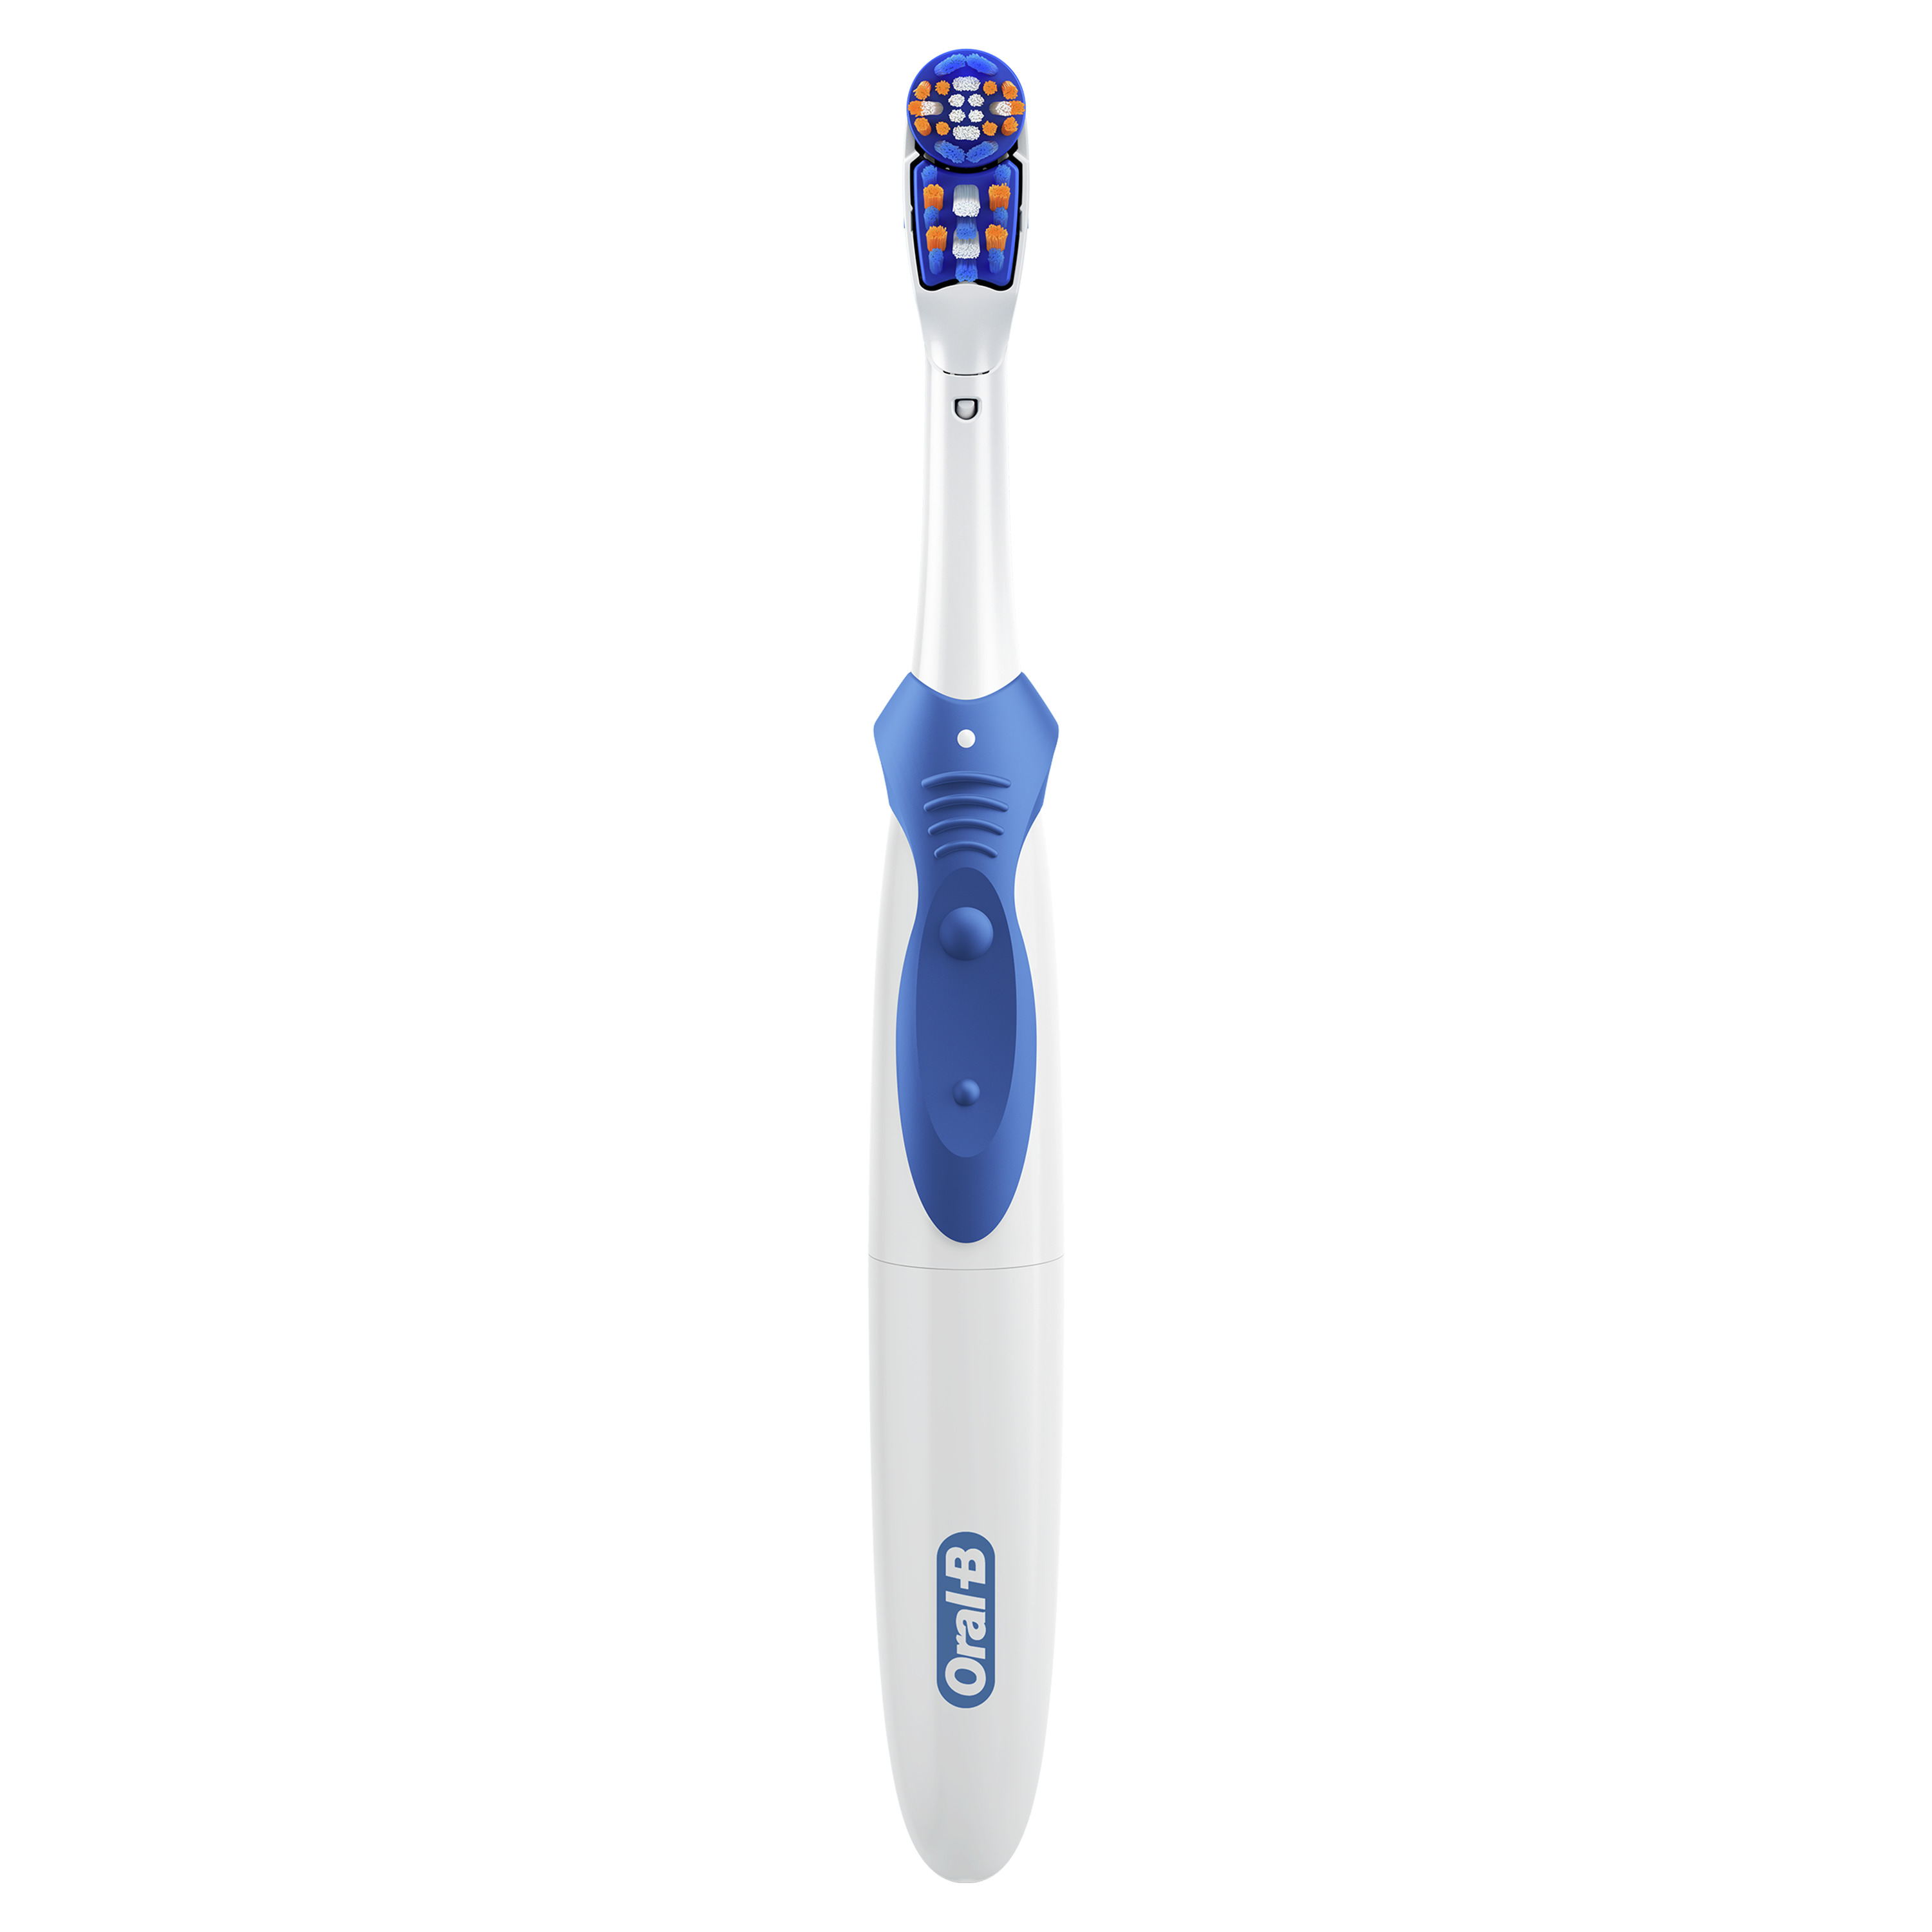 Oral-B 3D White Battery Toothbrush, 1 Count, Colors May Vary, for Adults and Children 3+ - image 2 of 9